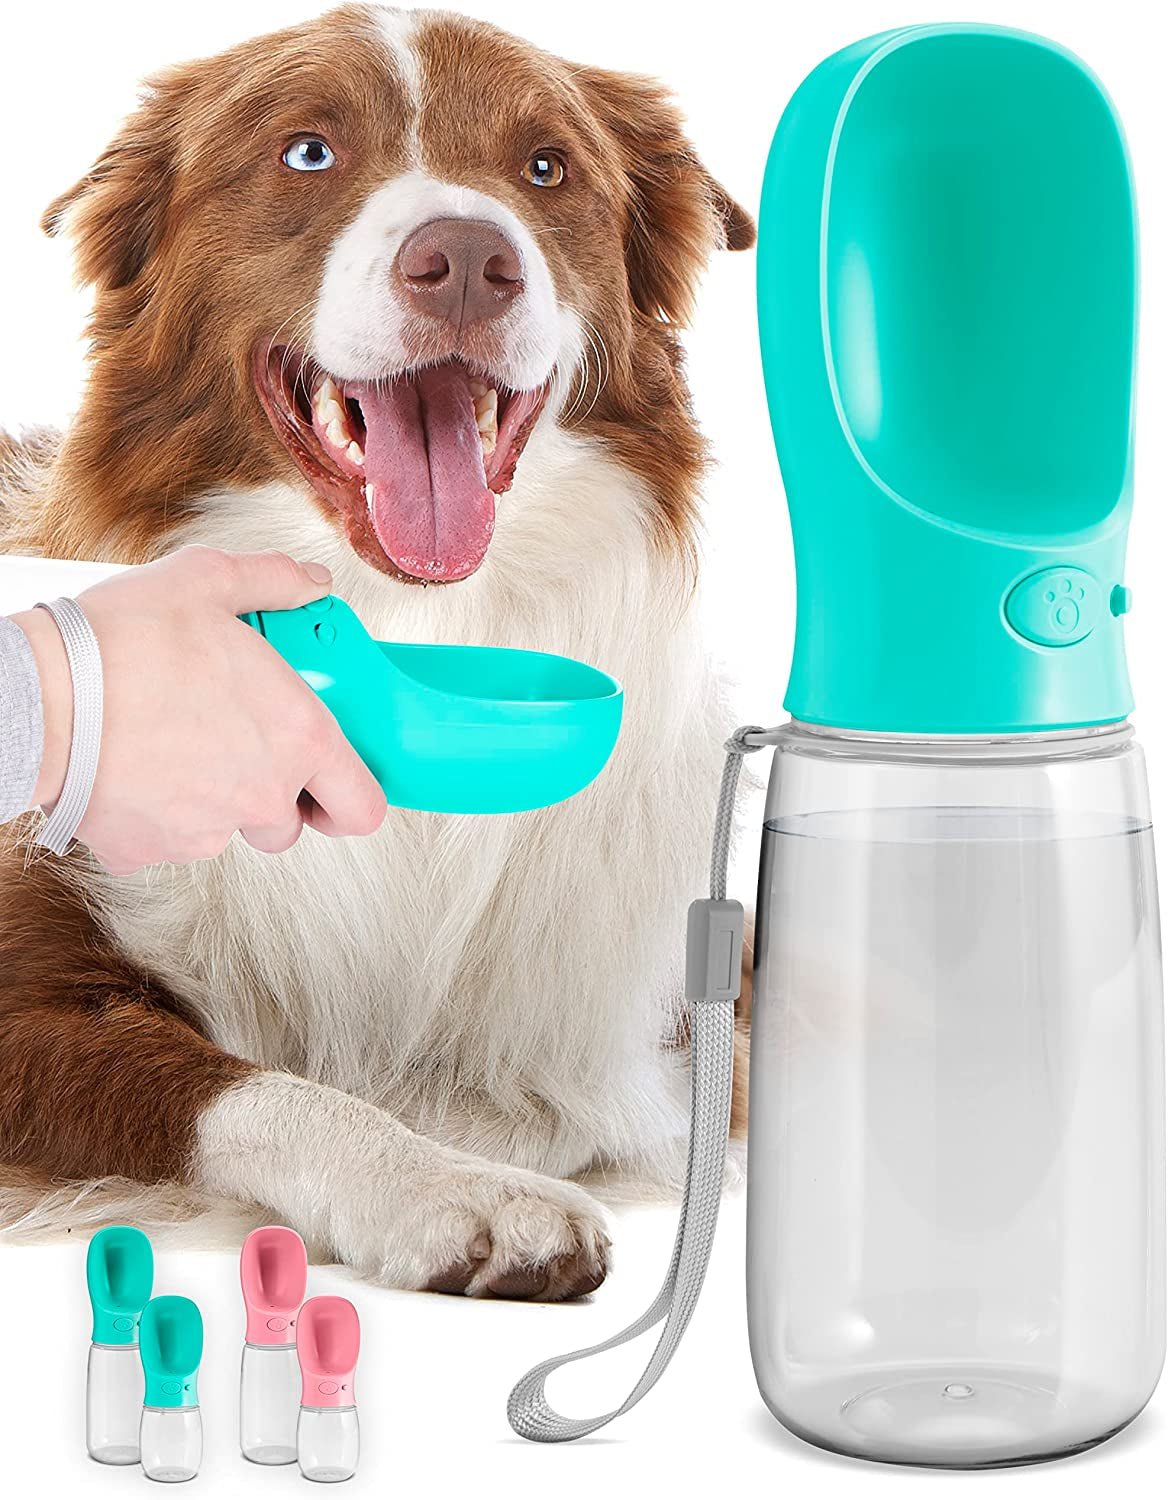 Malsipree Dog Water Bottle, Leak Proof Portable Puppy Water Dispenser with Drinking Feeder for Pets Outdoor Walking, Hiking, Travel, Food Grade Plastic (19Oz, Blue) - PETGS